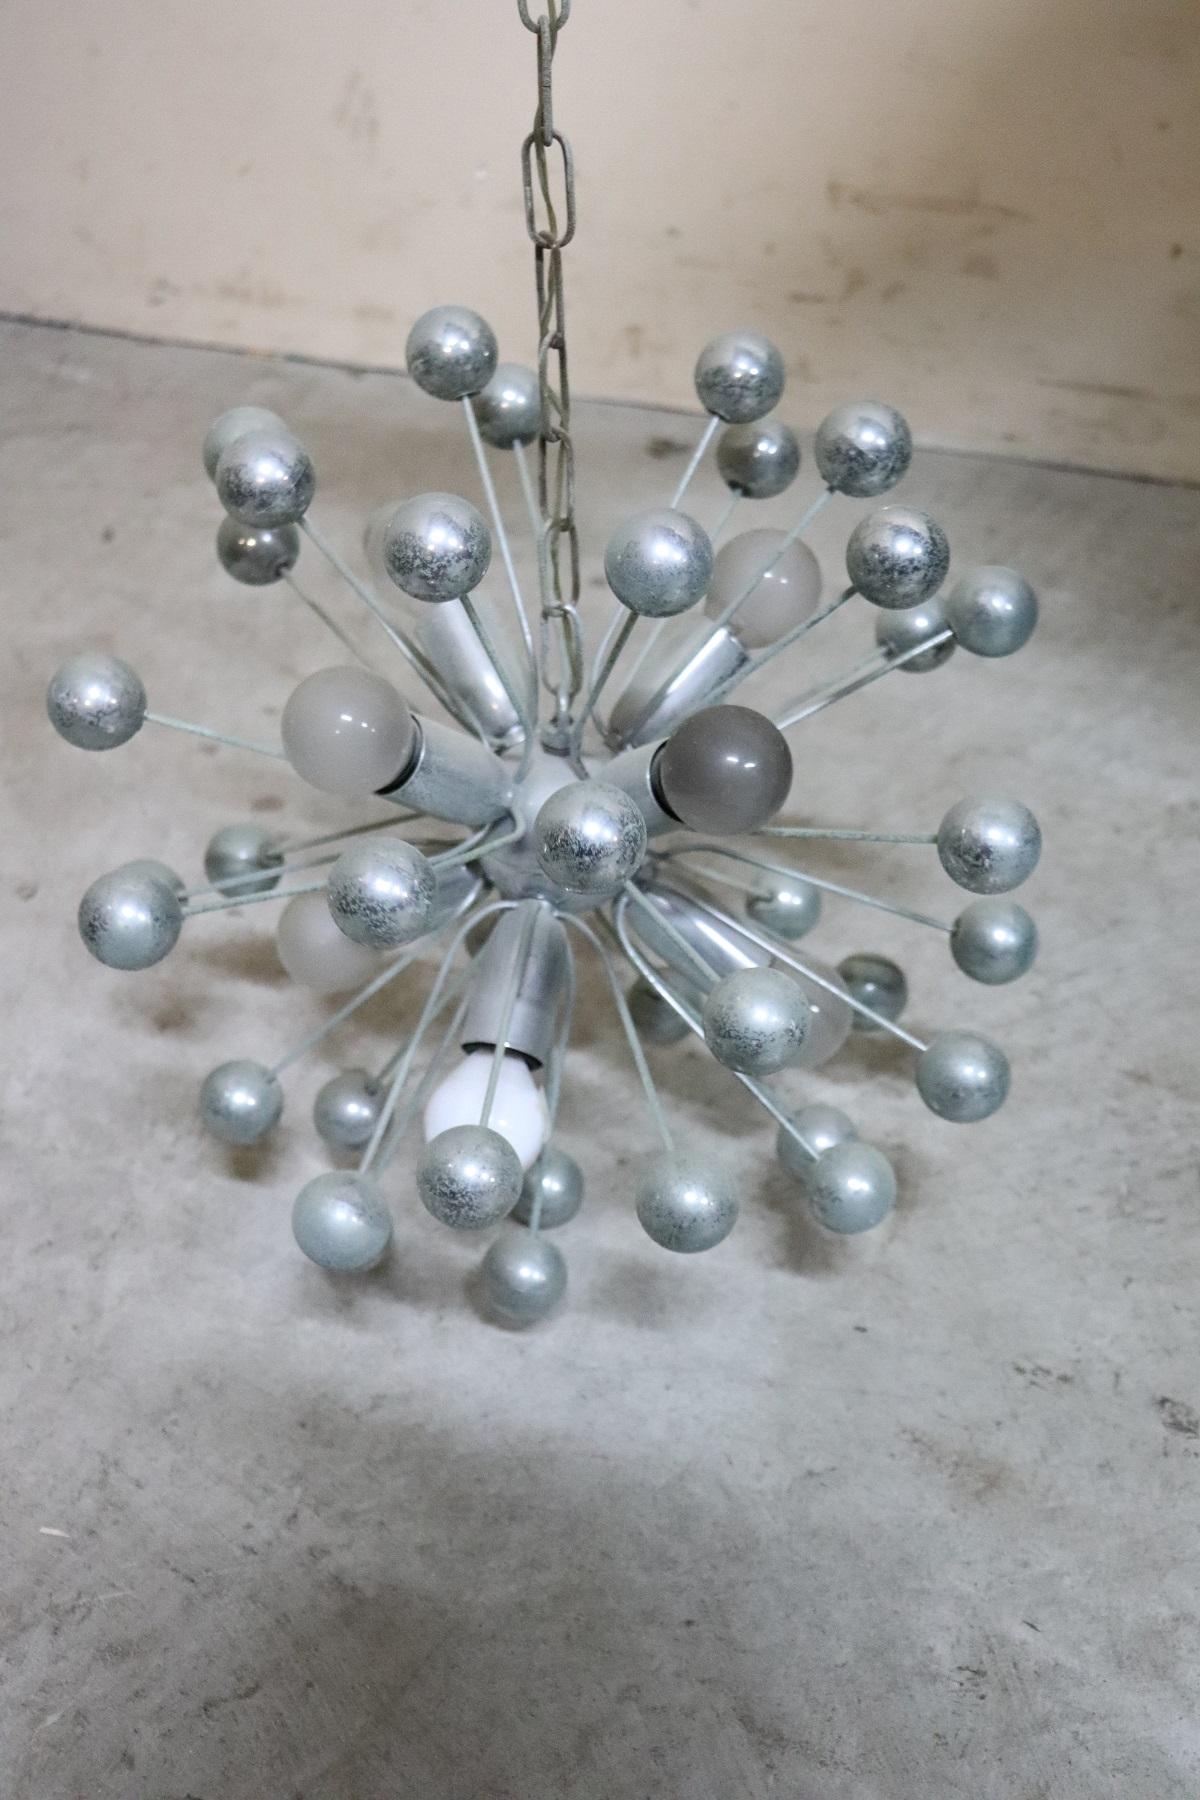 Beautiful and refined Italian chandelier from the circa 1980s made of chromed metal. Very bright eight interior lights. Used conditions. The height can be adjusted as desired the rings of the chain can be removed or added.